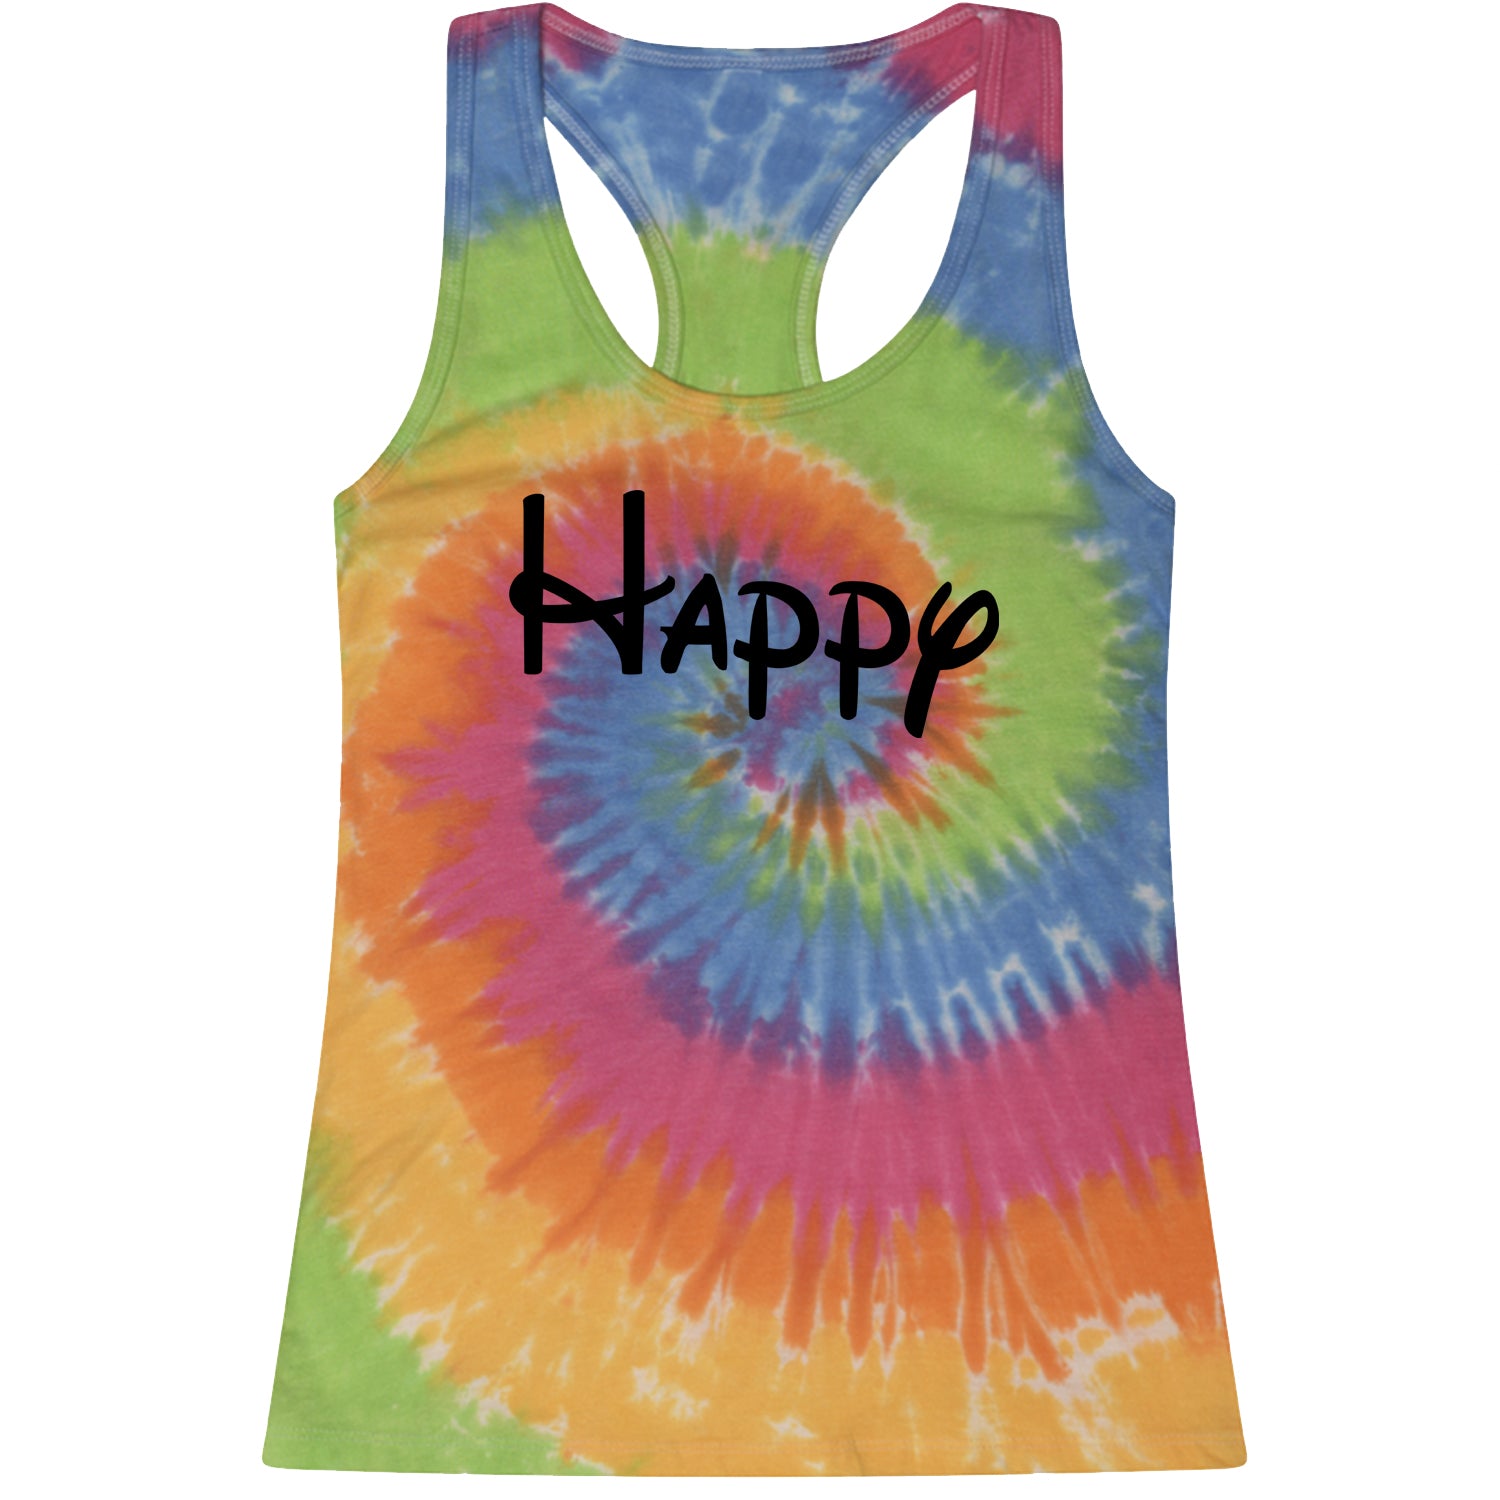 Happy - 7 Dwarfs Costume Racerback Tank Top for Women and, costume, dwarfs, group, halloween, matching, seven, snow, the, white by Expression Tees